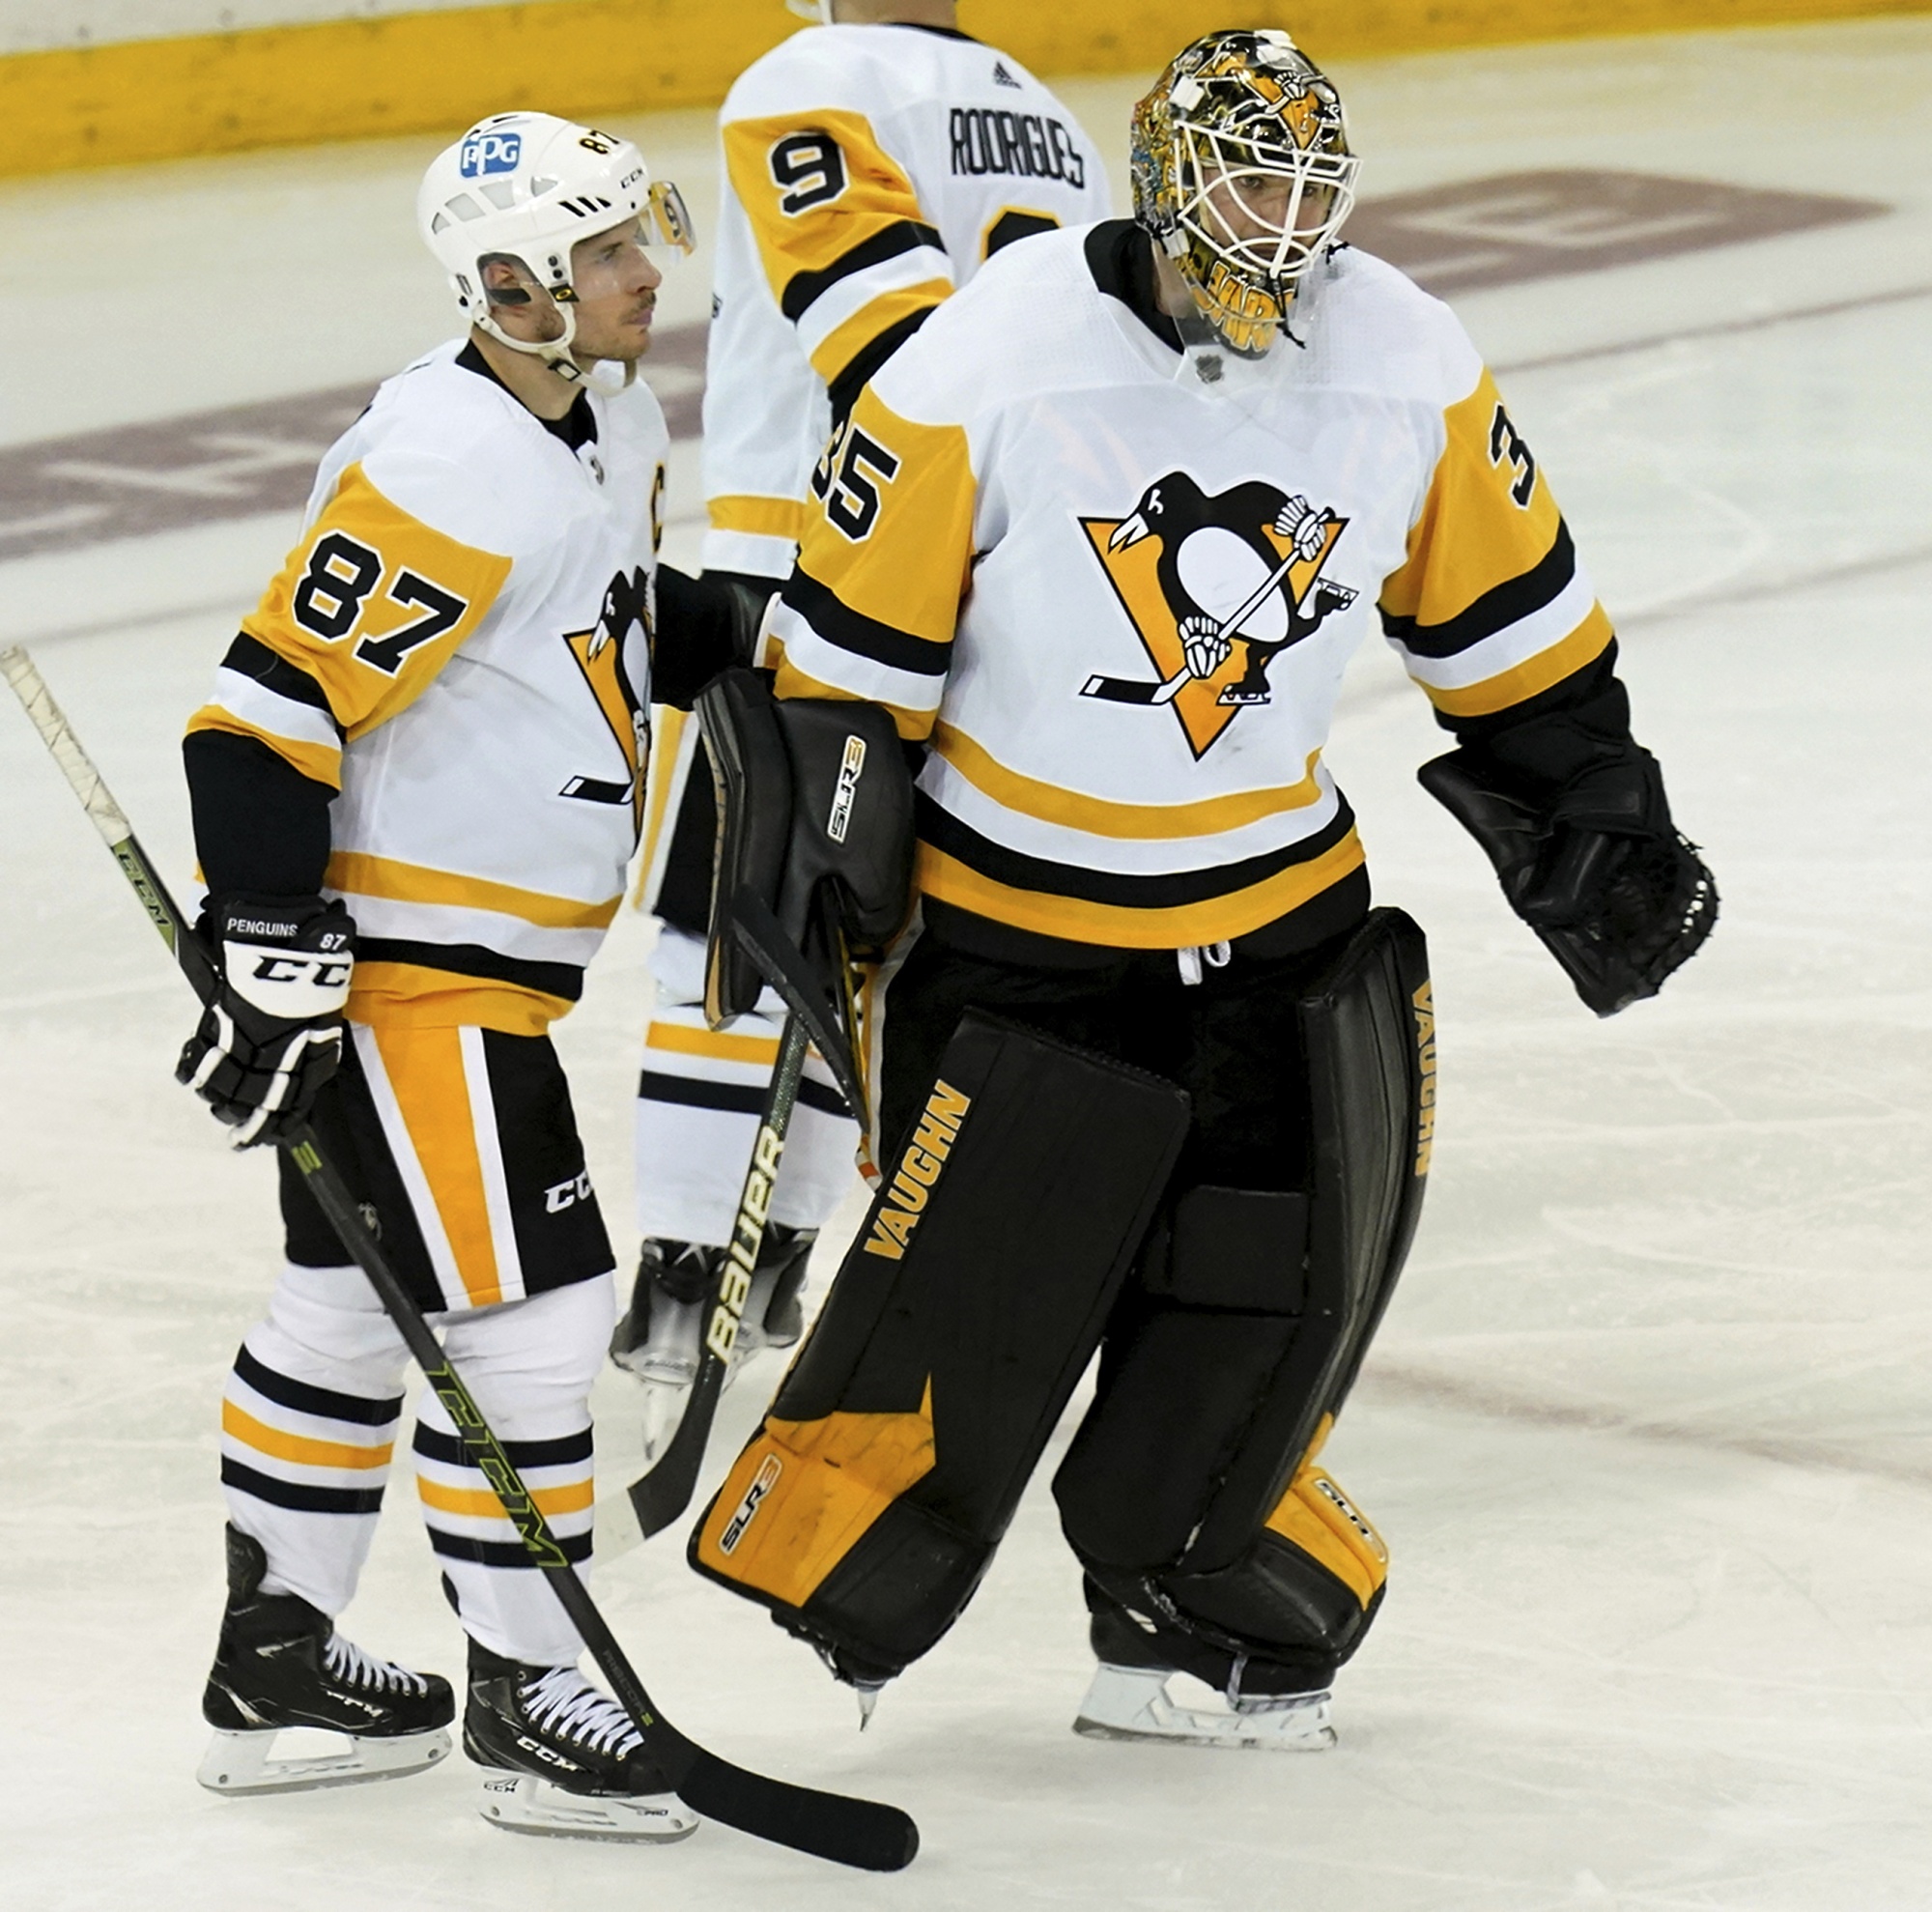 What do the Pittsburgh Penguins have to do with affordable housing